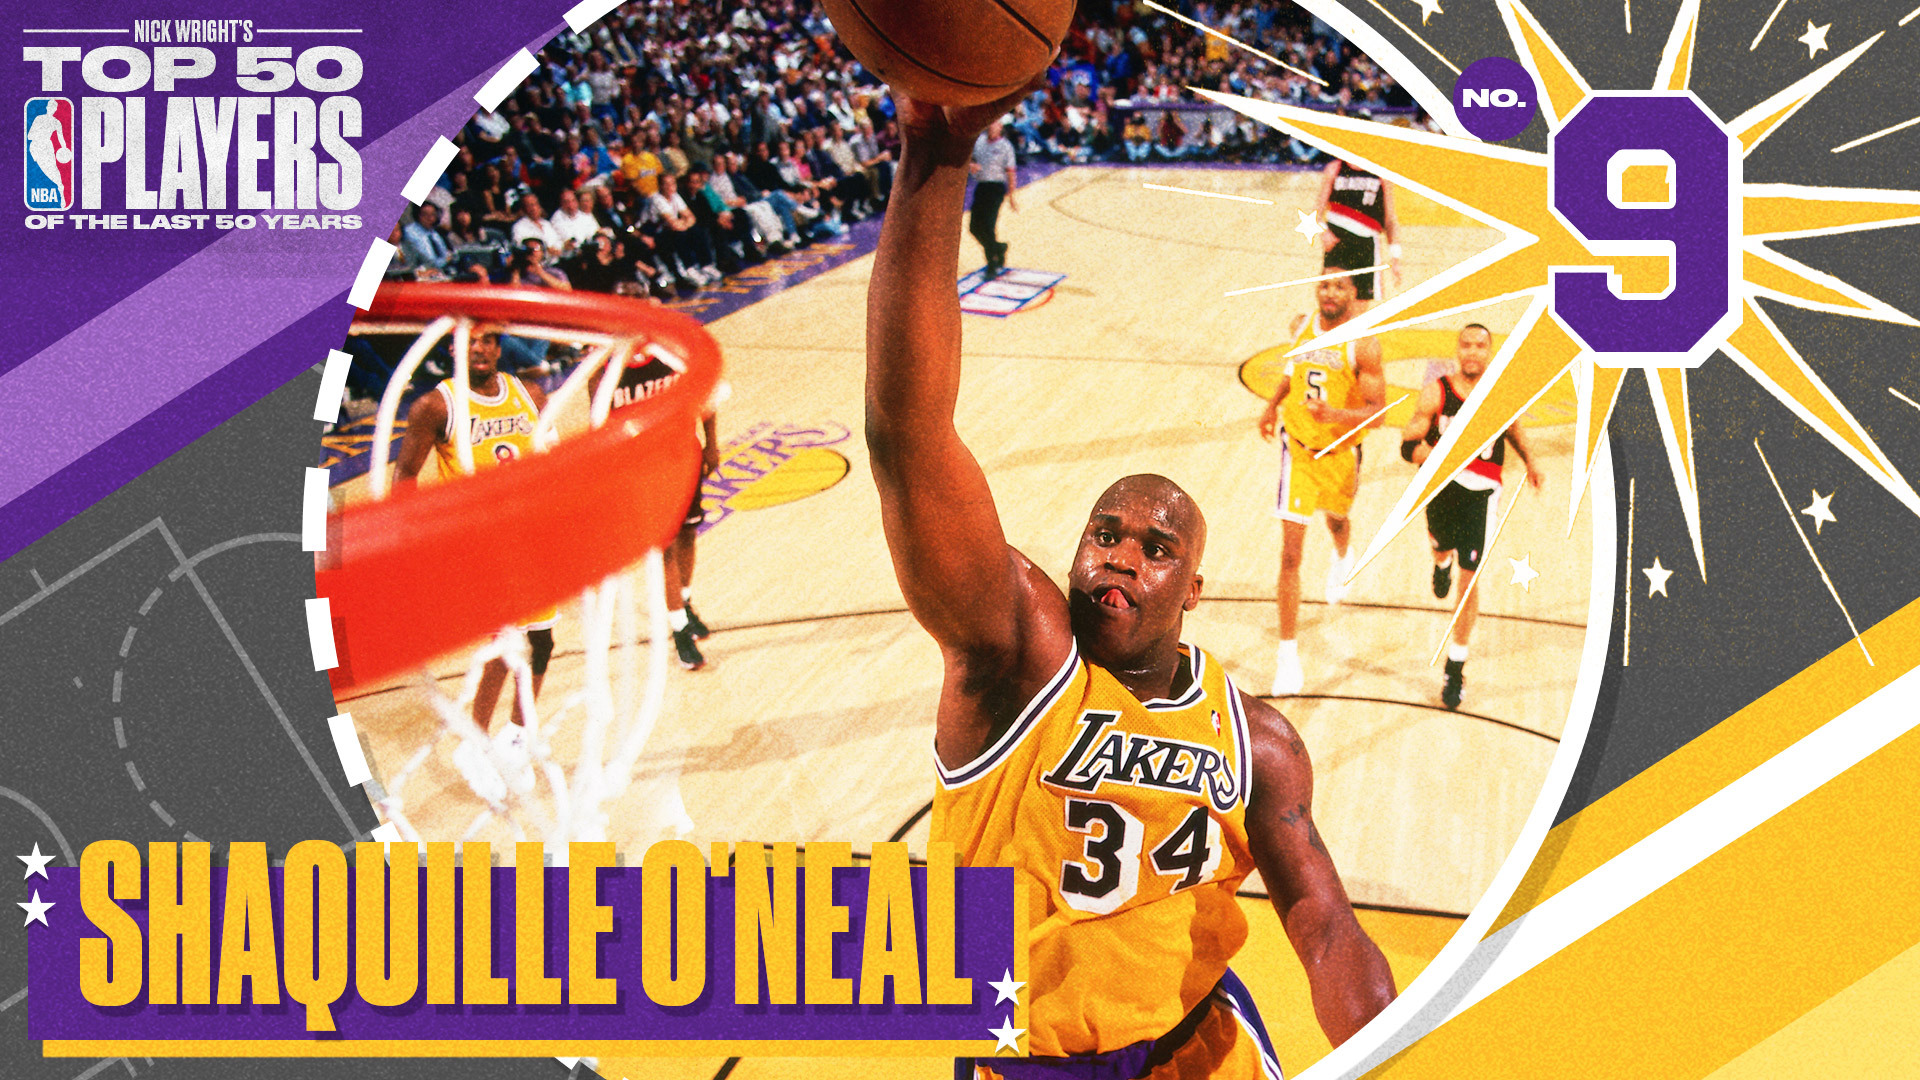 Top 50 NBA players from last 50 years: Shaquille O’Neal ranks No. 9